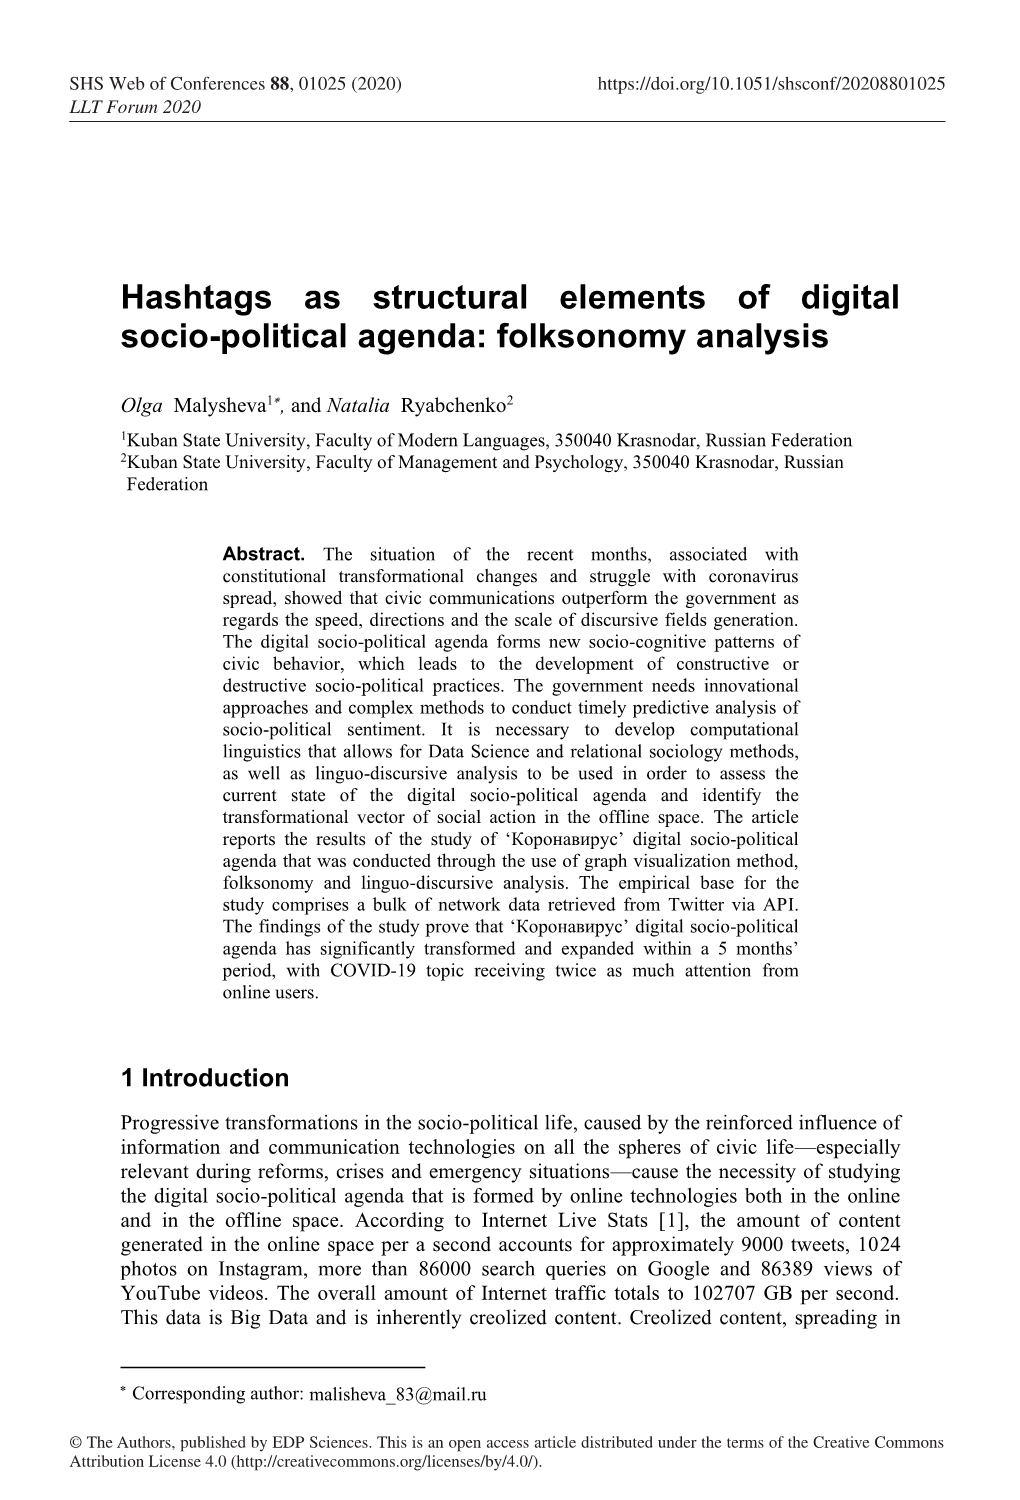 Hashtags As Structural Elements of Digital Socio-Political Agenda: Folksonomy Analysis